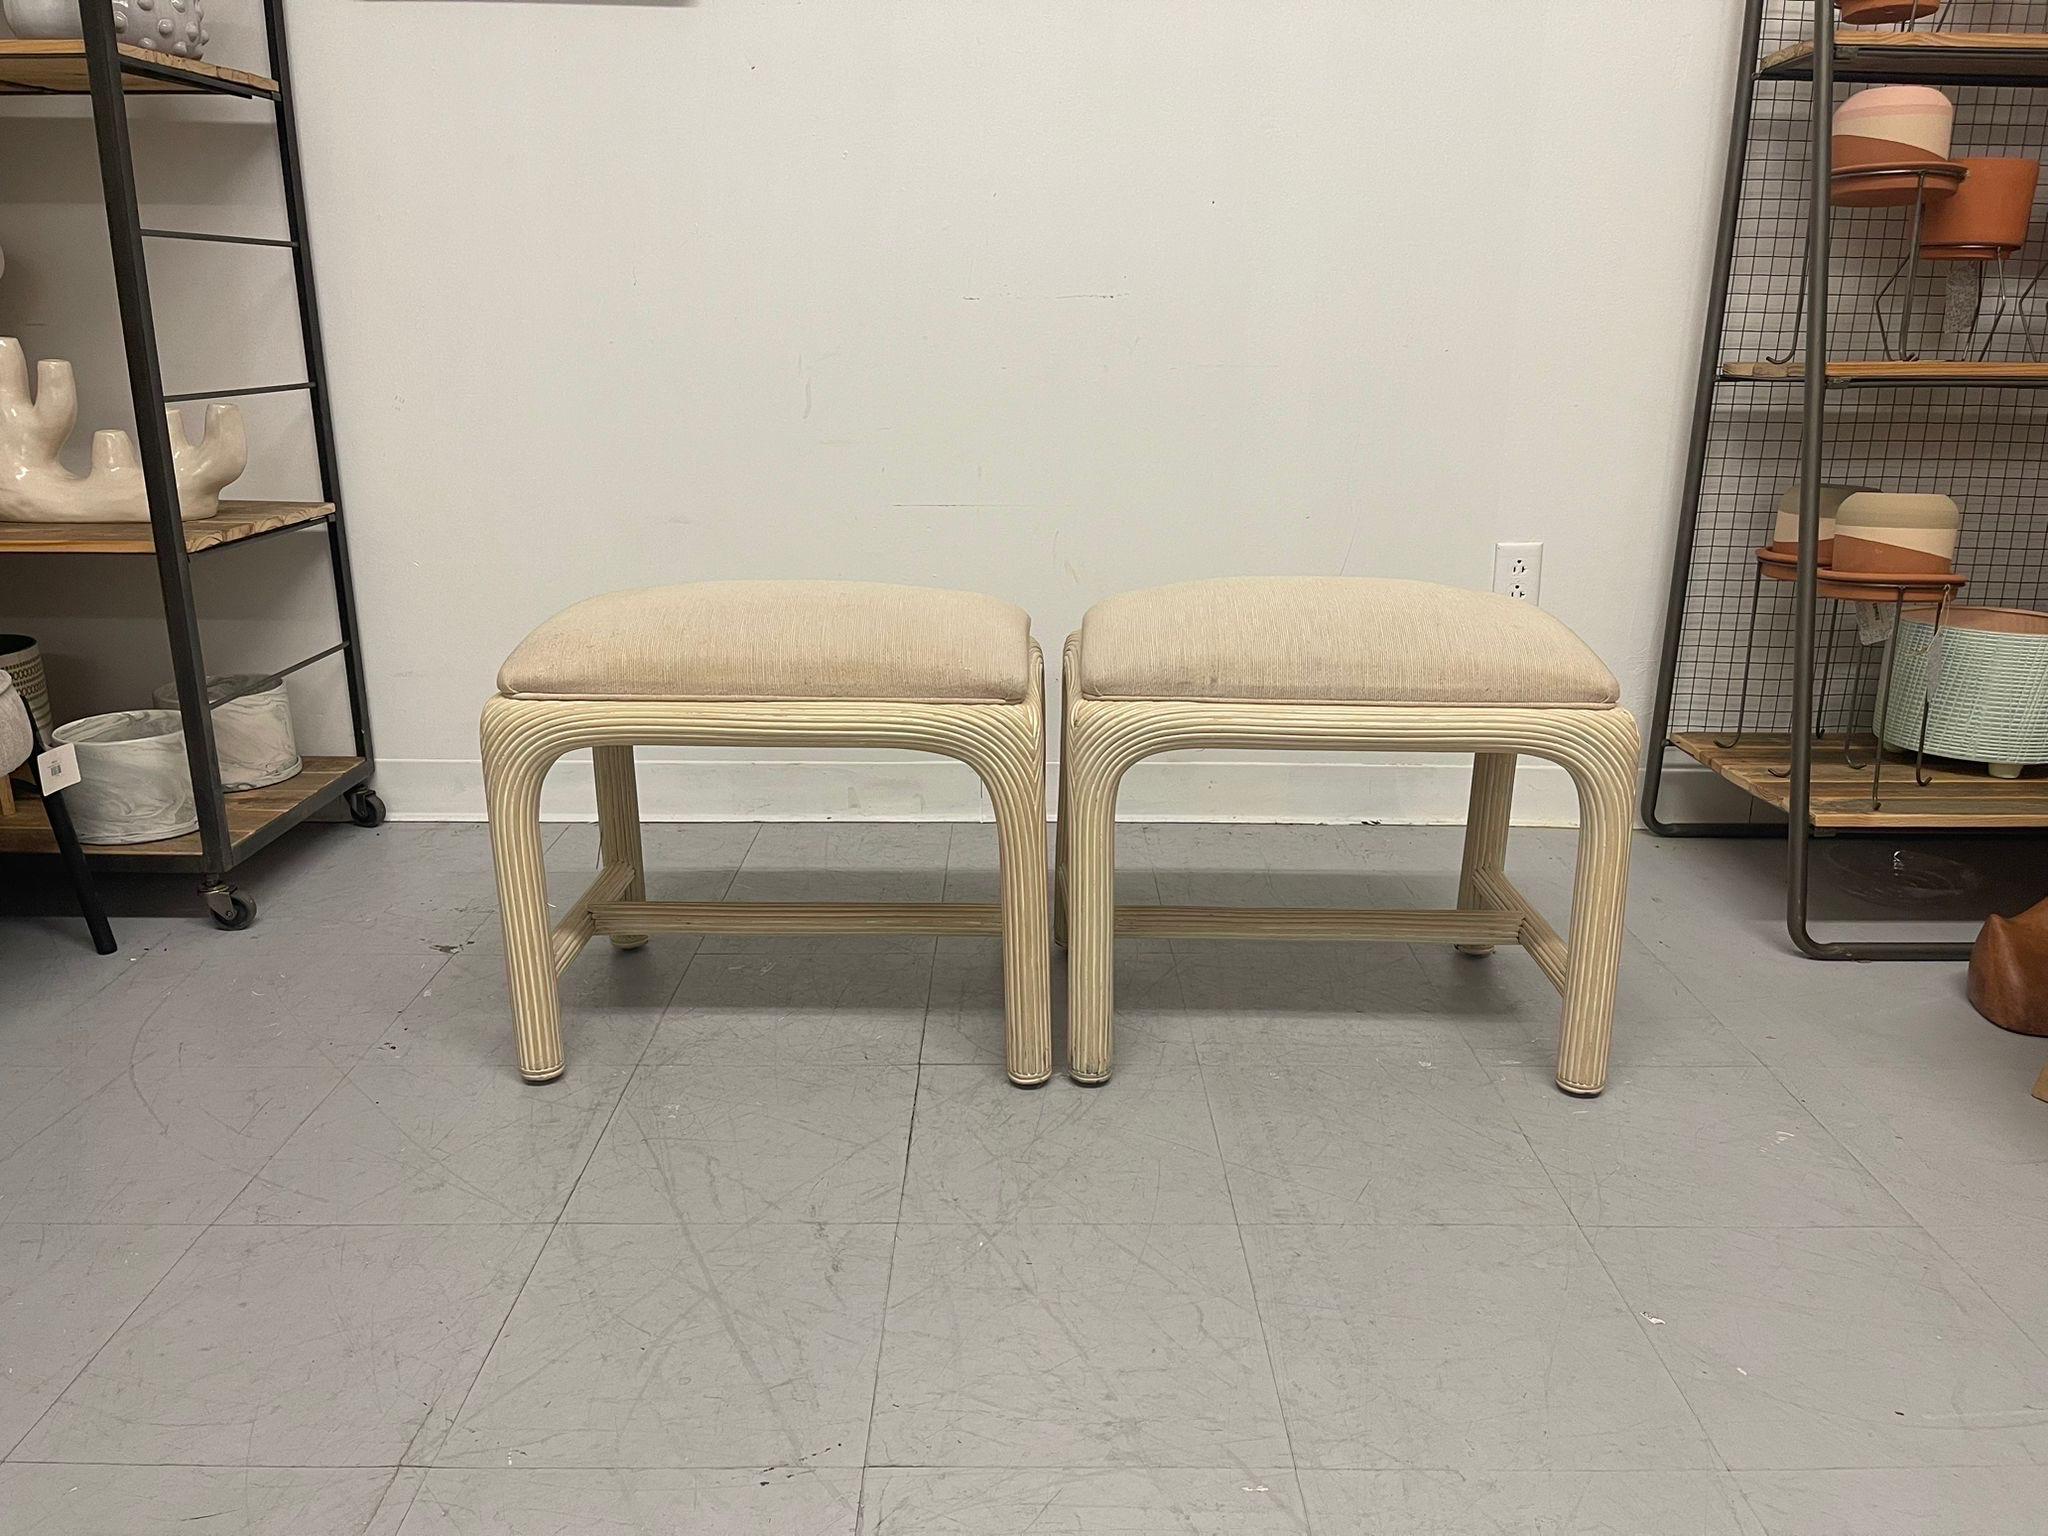 Pair of Stools with Fabric Cushions and Whitewashed Finish. Vintage Condition Consistent with Age as Pictured.

Dimensions. 22 W ; 16 D ; 18 1/2 H